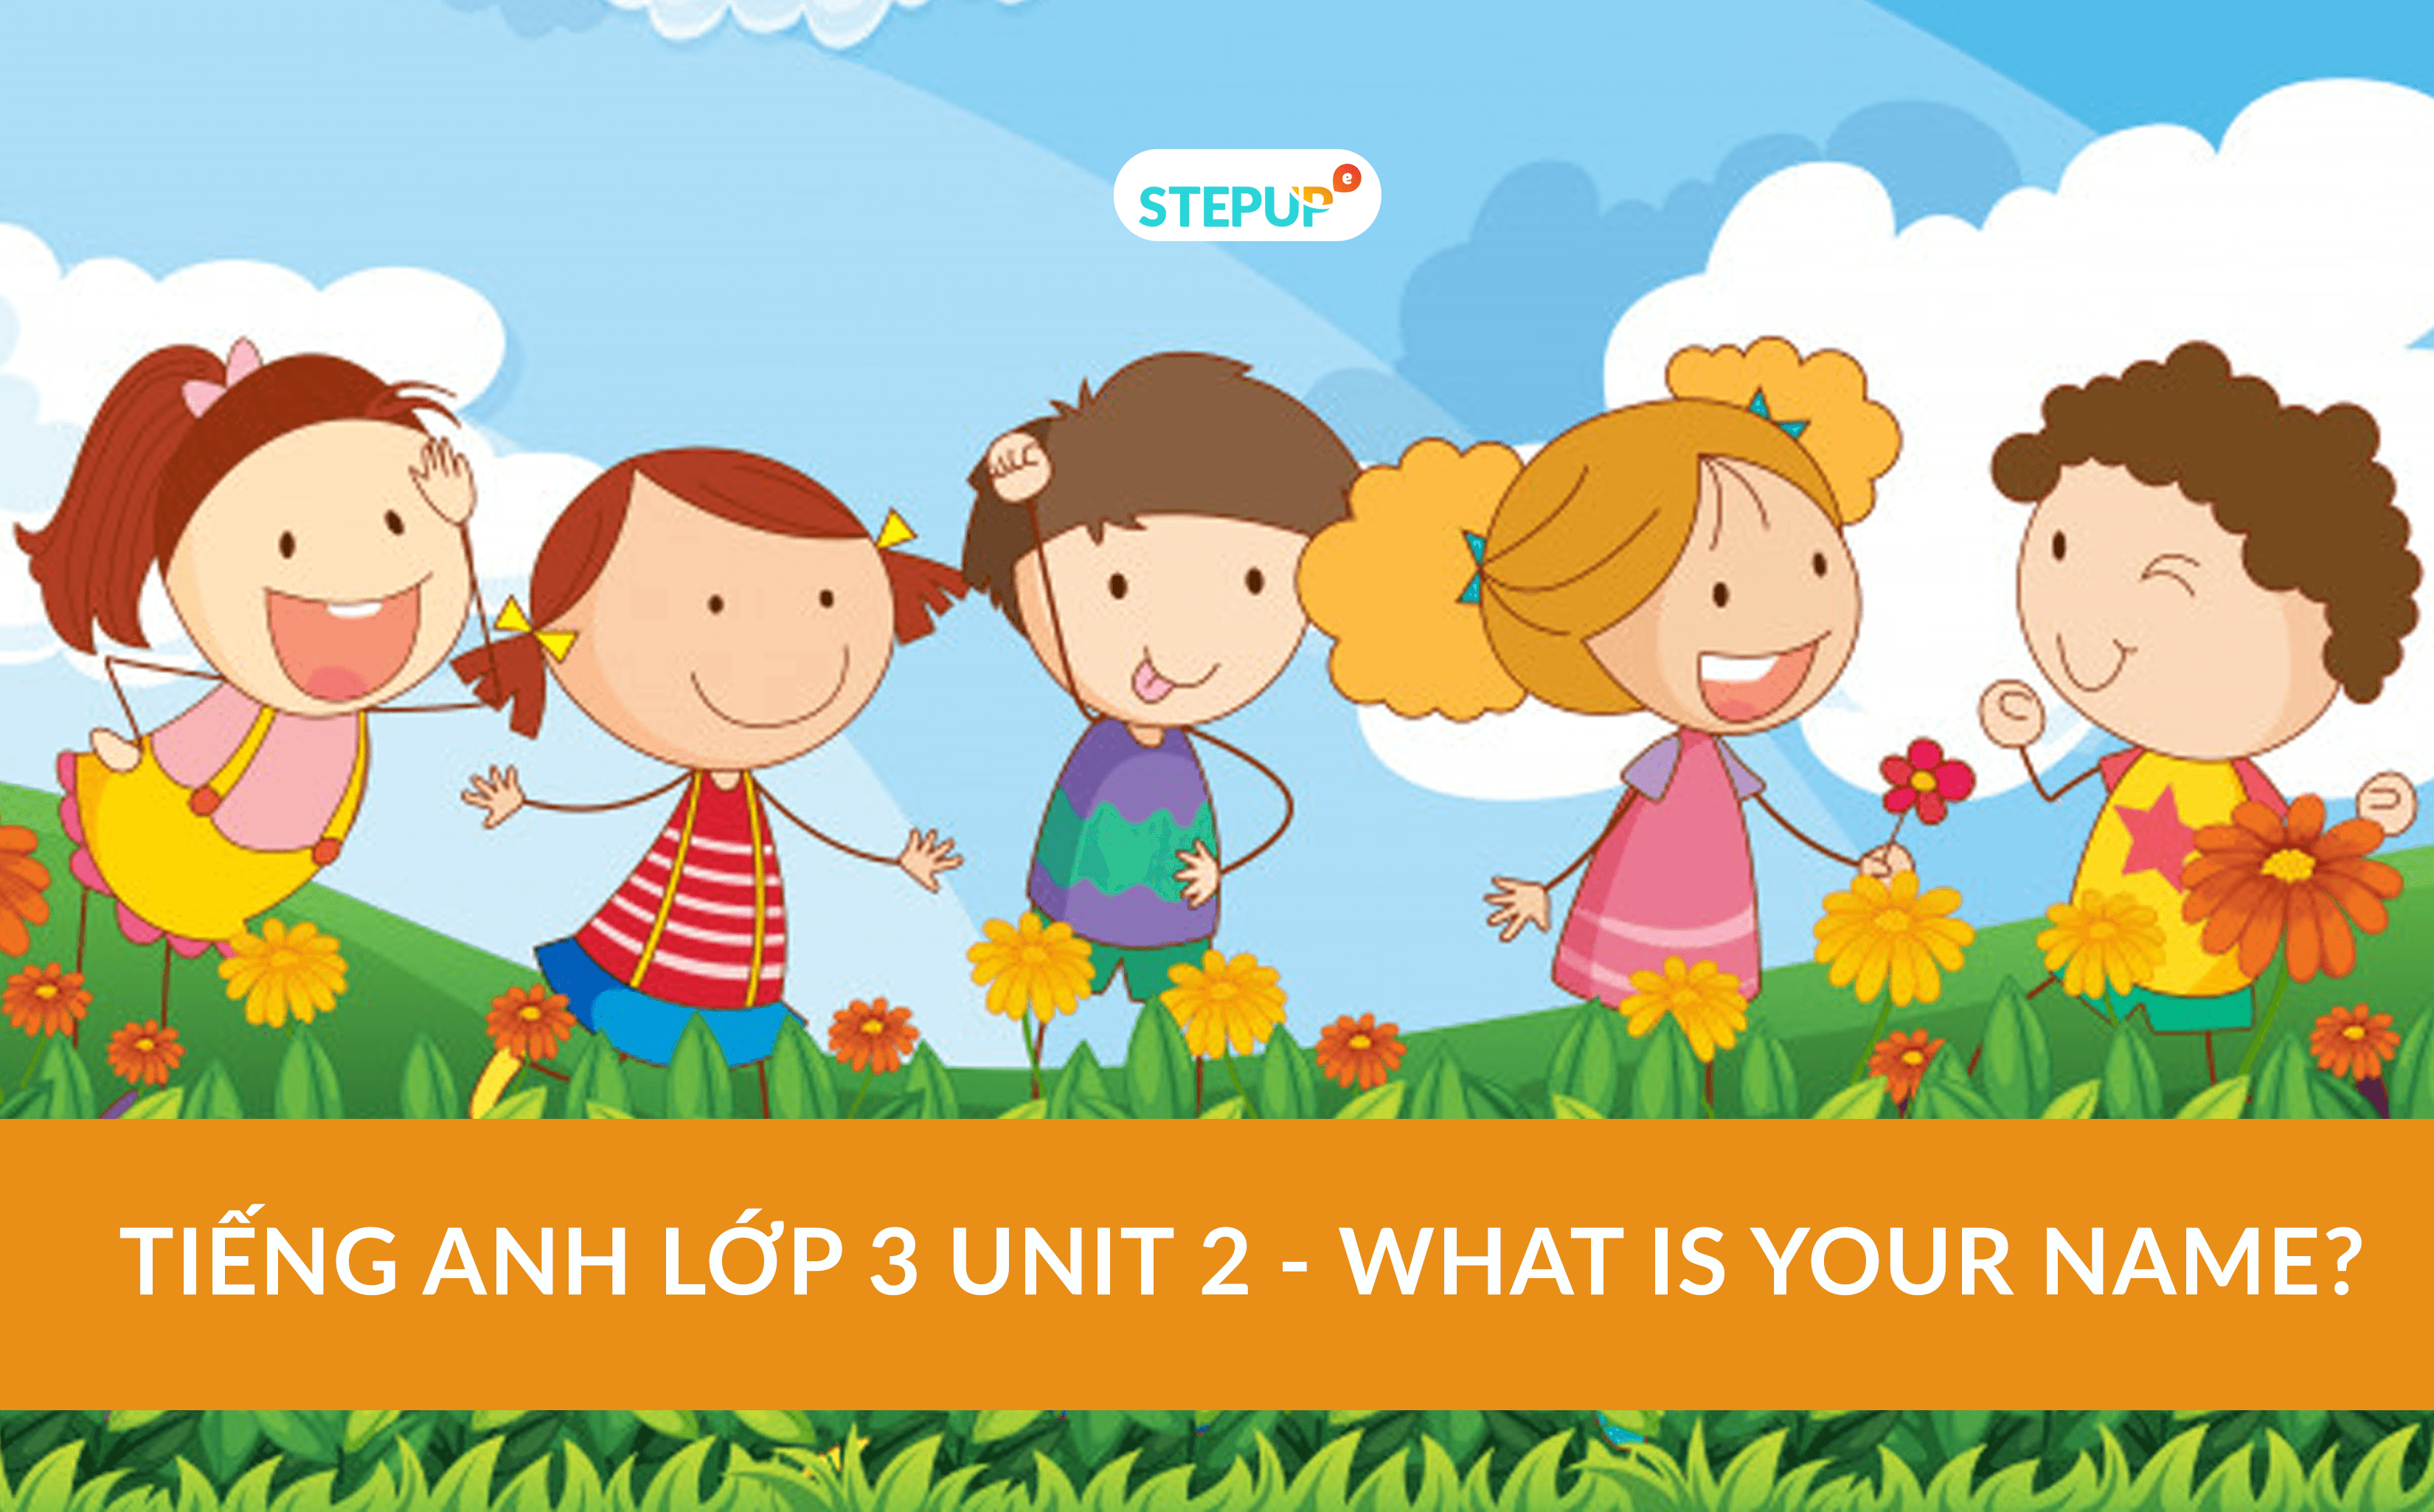 Tiếng Anh lớp 3 unit 2 - What is your name?